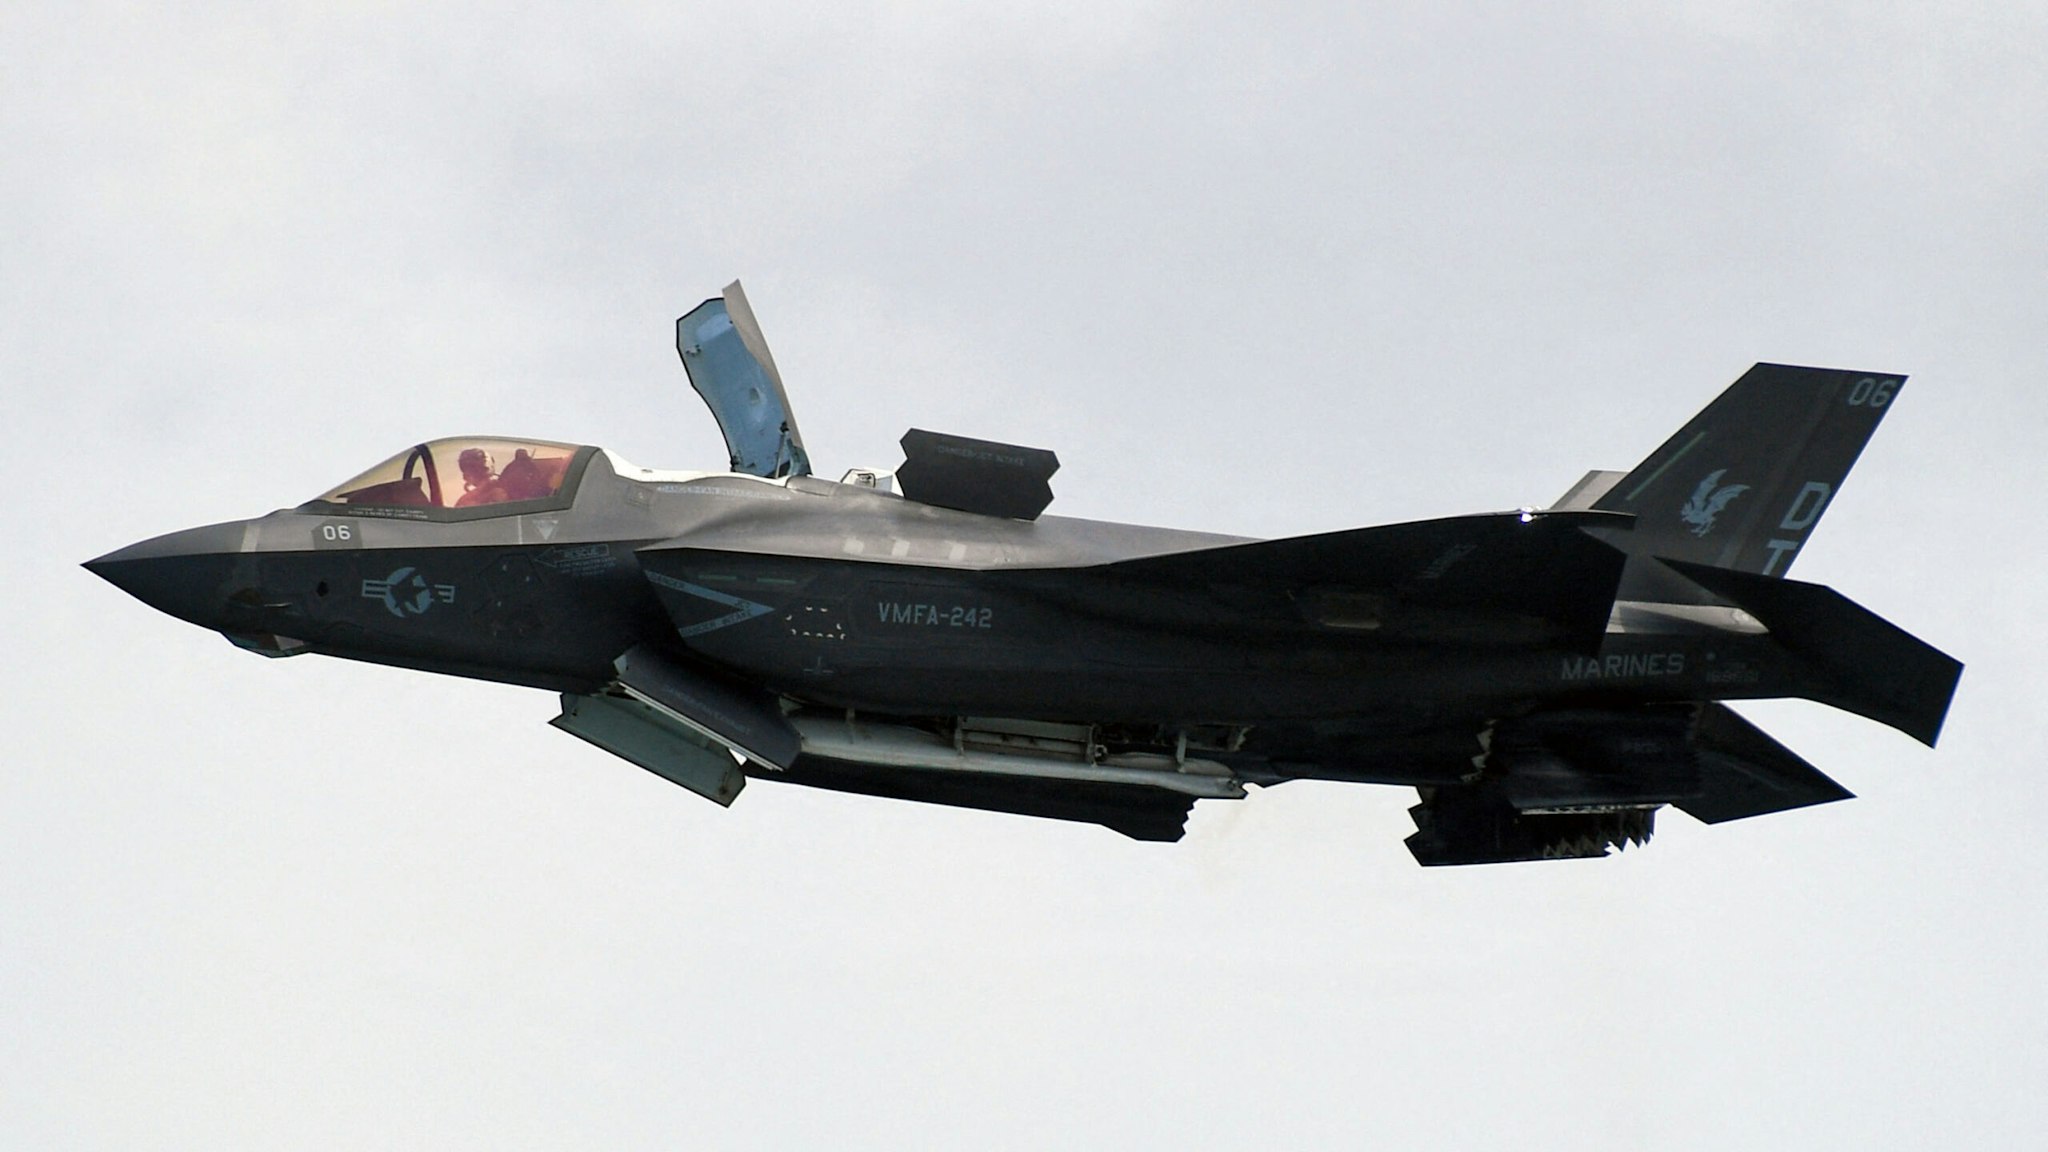 A US Marine Corps F-35B Lightning II, a short takeoff and vertical landing (STOVL) version of the Joint Strike Fighter aircraft, flies past during a preview of the Singapore Airshow in Singapore on February 13, 2022.